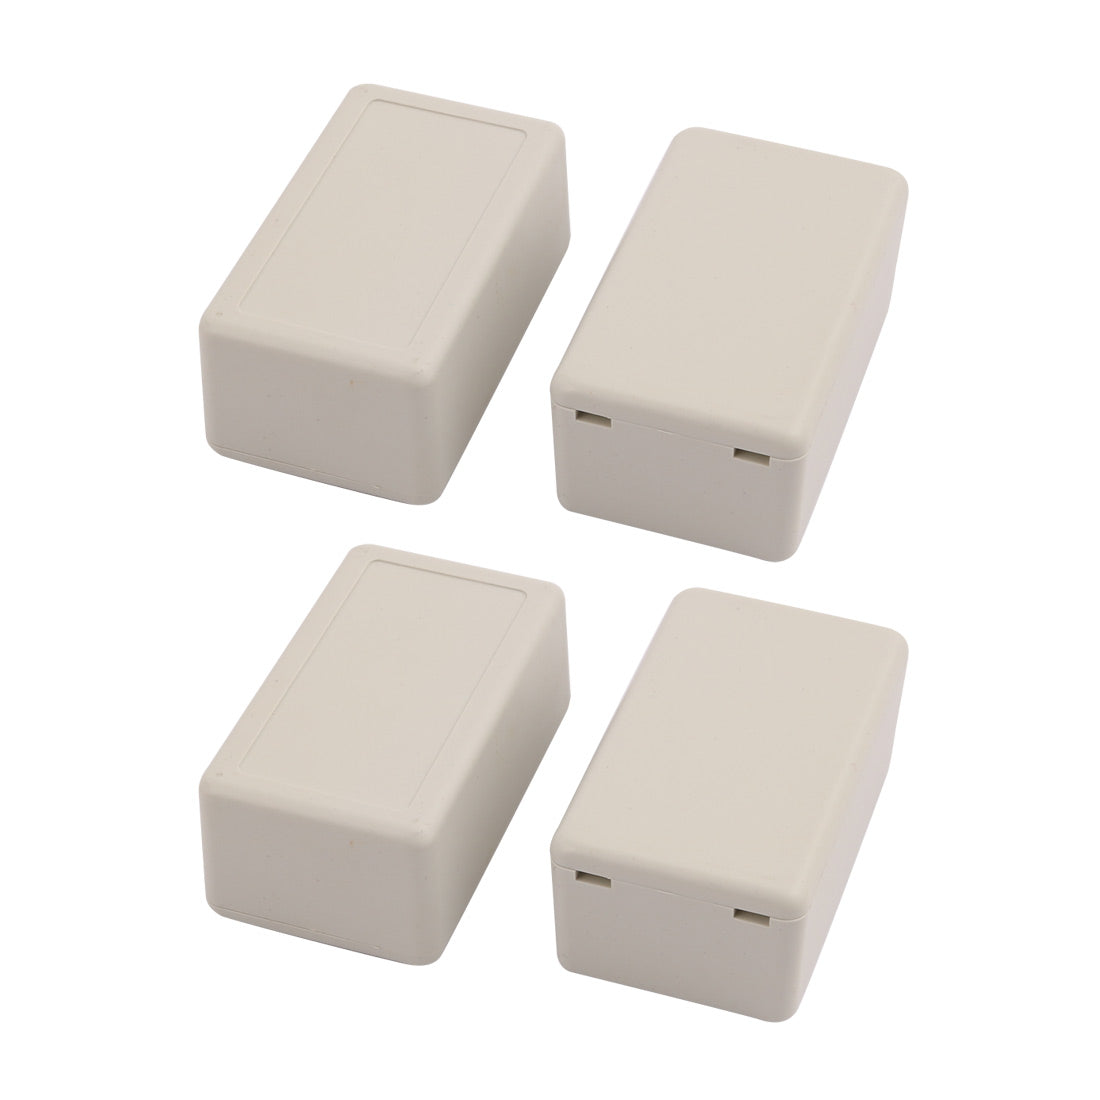 uxcell Uxcell 4pcs Dustproof IP65 Plastic Electric Project Case Junction Box 60mm x 36mm x 25mm Gray